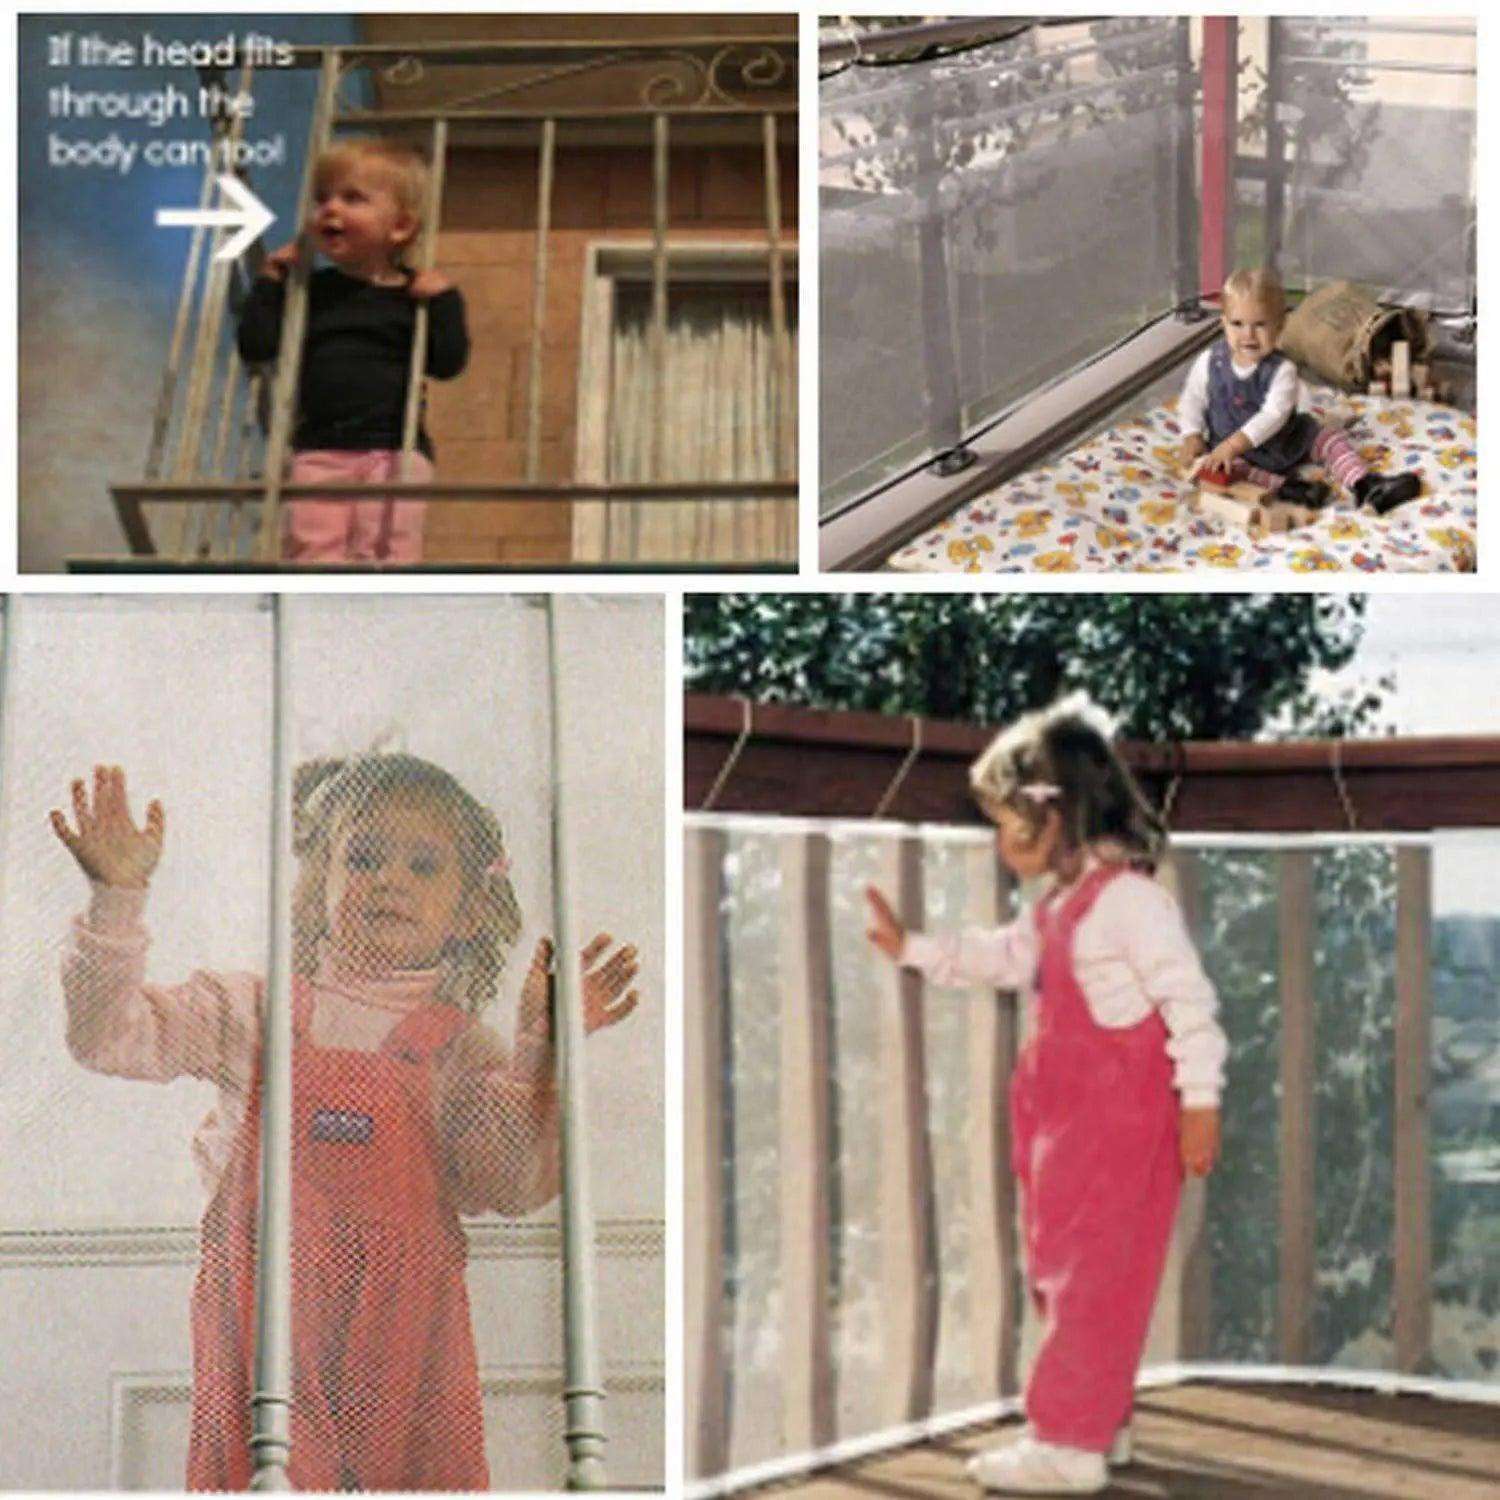 Kiddale 1-Pack Baby White Safety Net for Stairs & Balcony Baby Safety Kiddale   